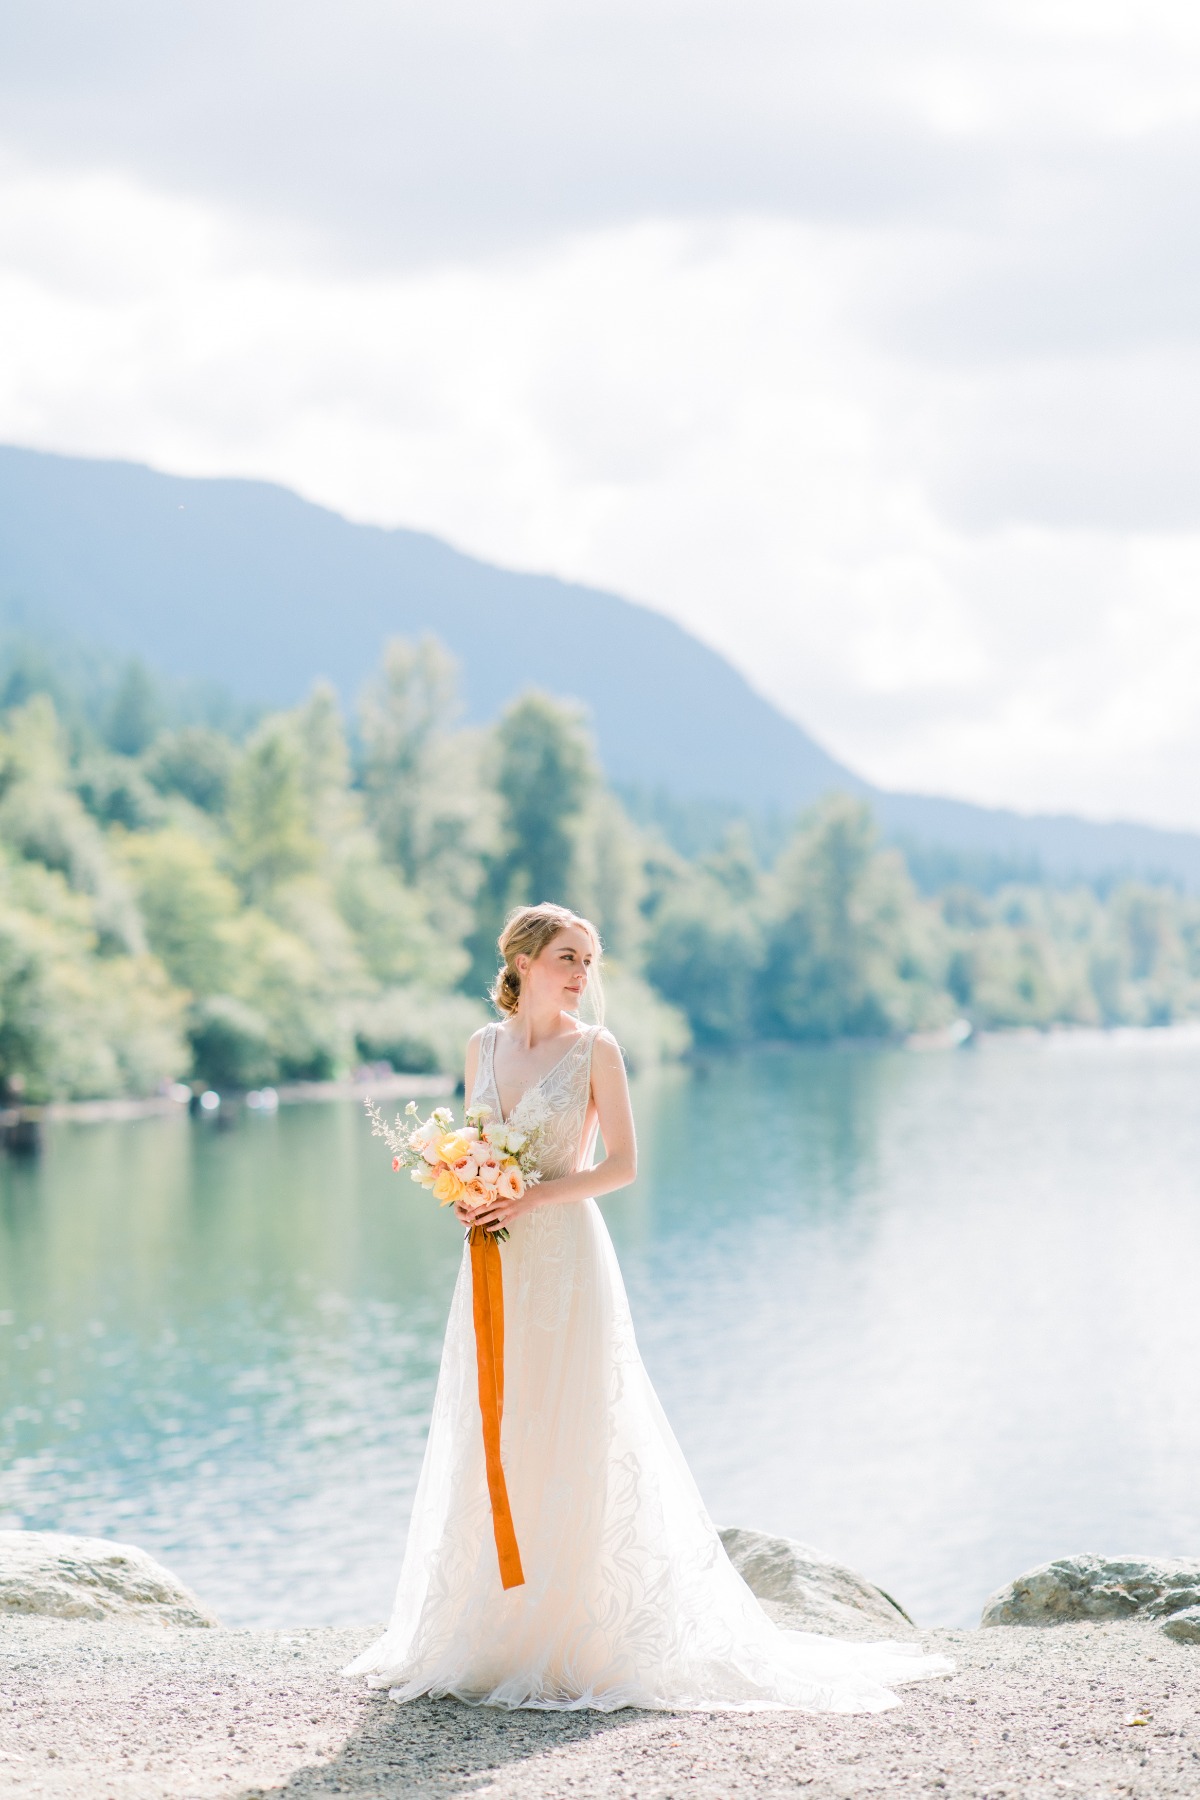 A Bridal Shoot Inspired by the Seattle Sunset in Late Summer